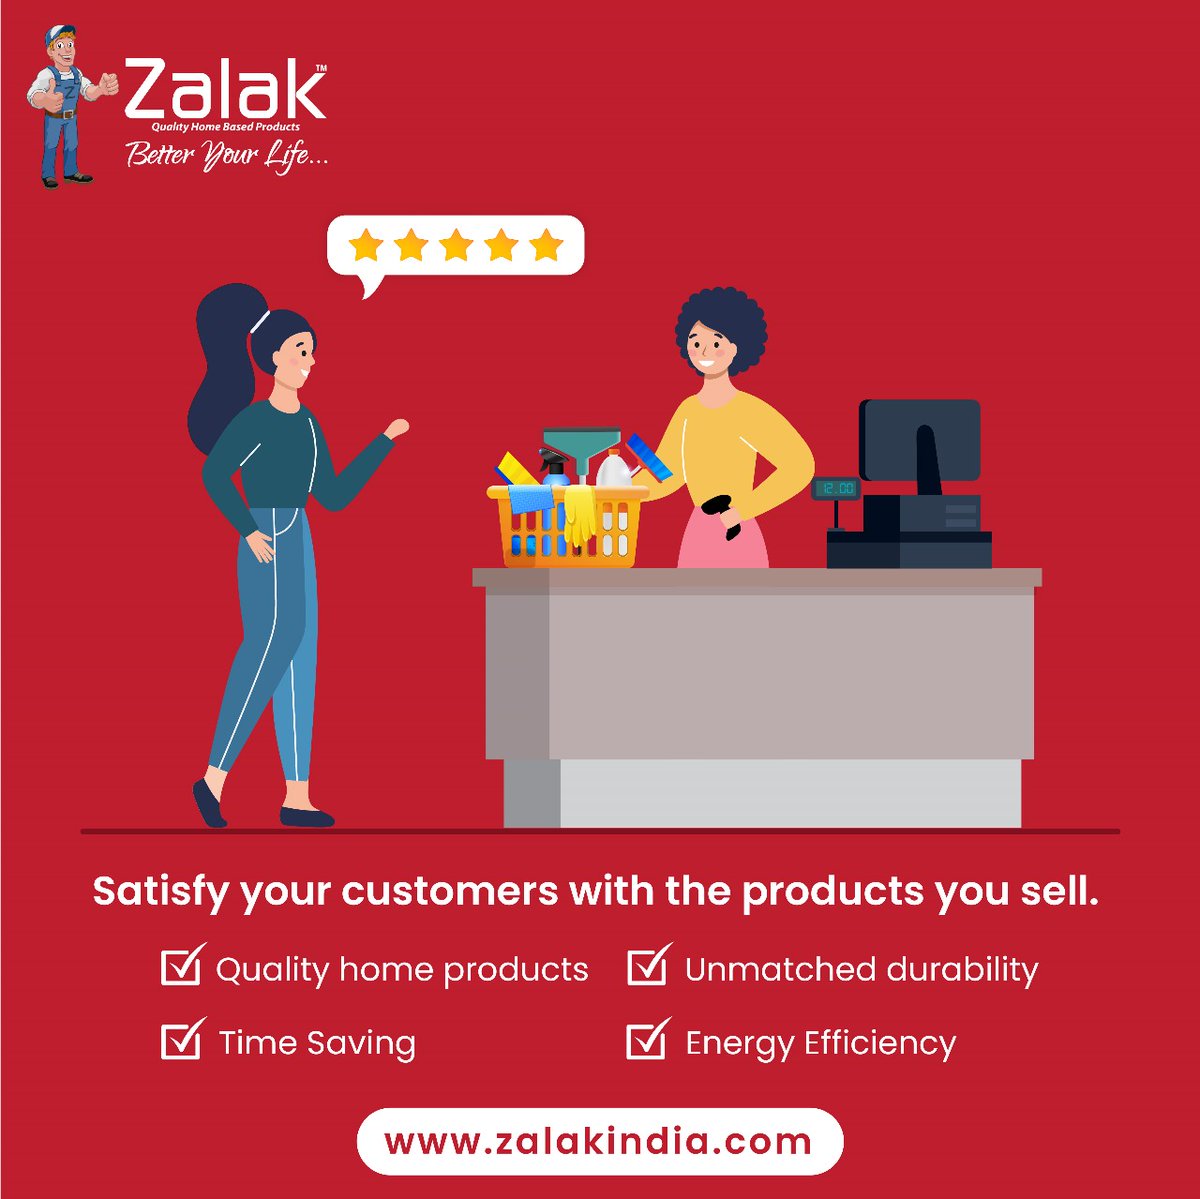 Let them come to you for the quality cleaning goods your store keeps. Satisfaction Guaranteed!
#manufacturer #household #householditems #householdproducts #householdcleaning #householdessentials #householdappliances #householdproducts #kitchenclean #kitchencleaner #kitchencleaner